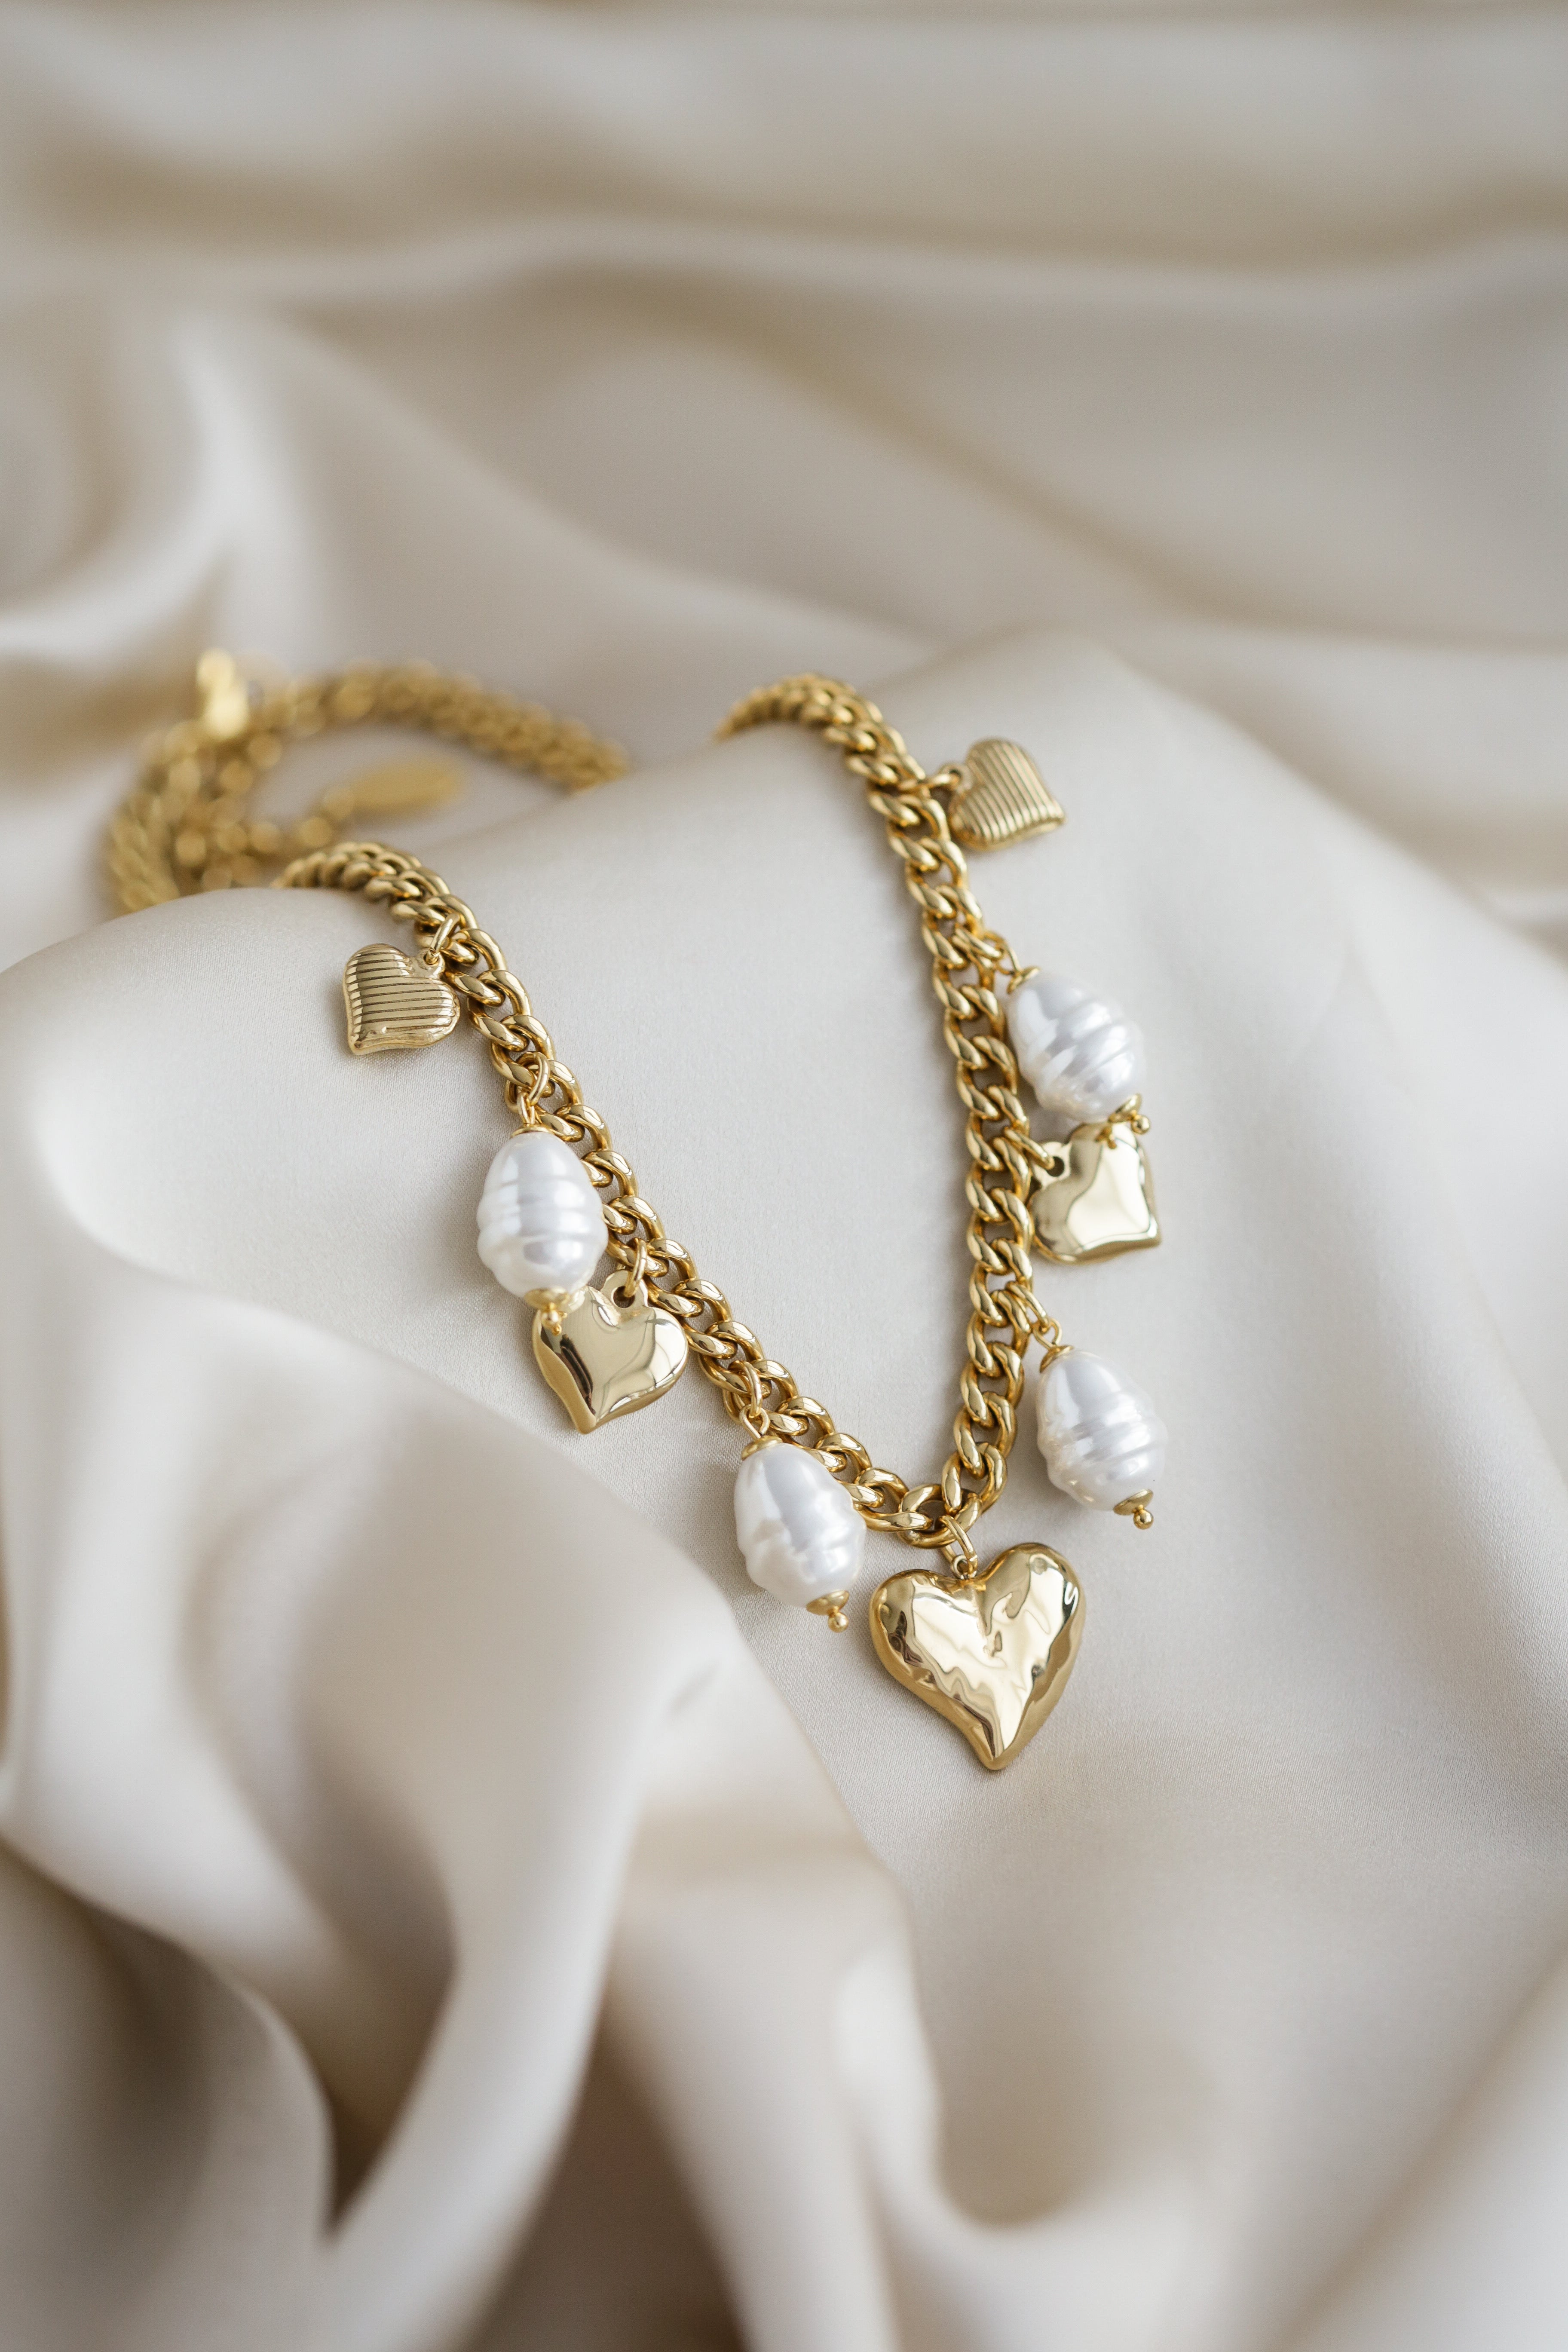 The Heart - Statement Necklace - Boutique Minimaliste has waterproof, durable, elegant and vintage inspired jewelry